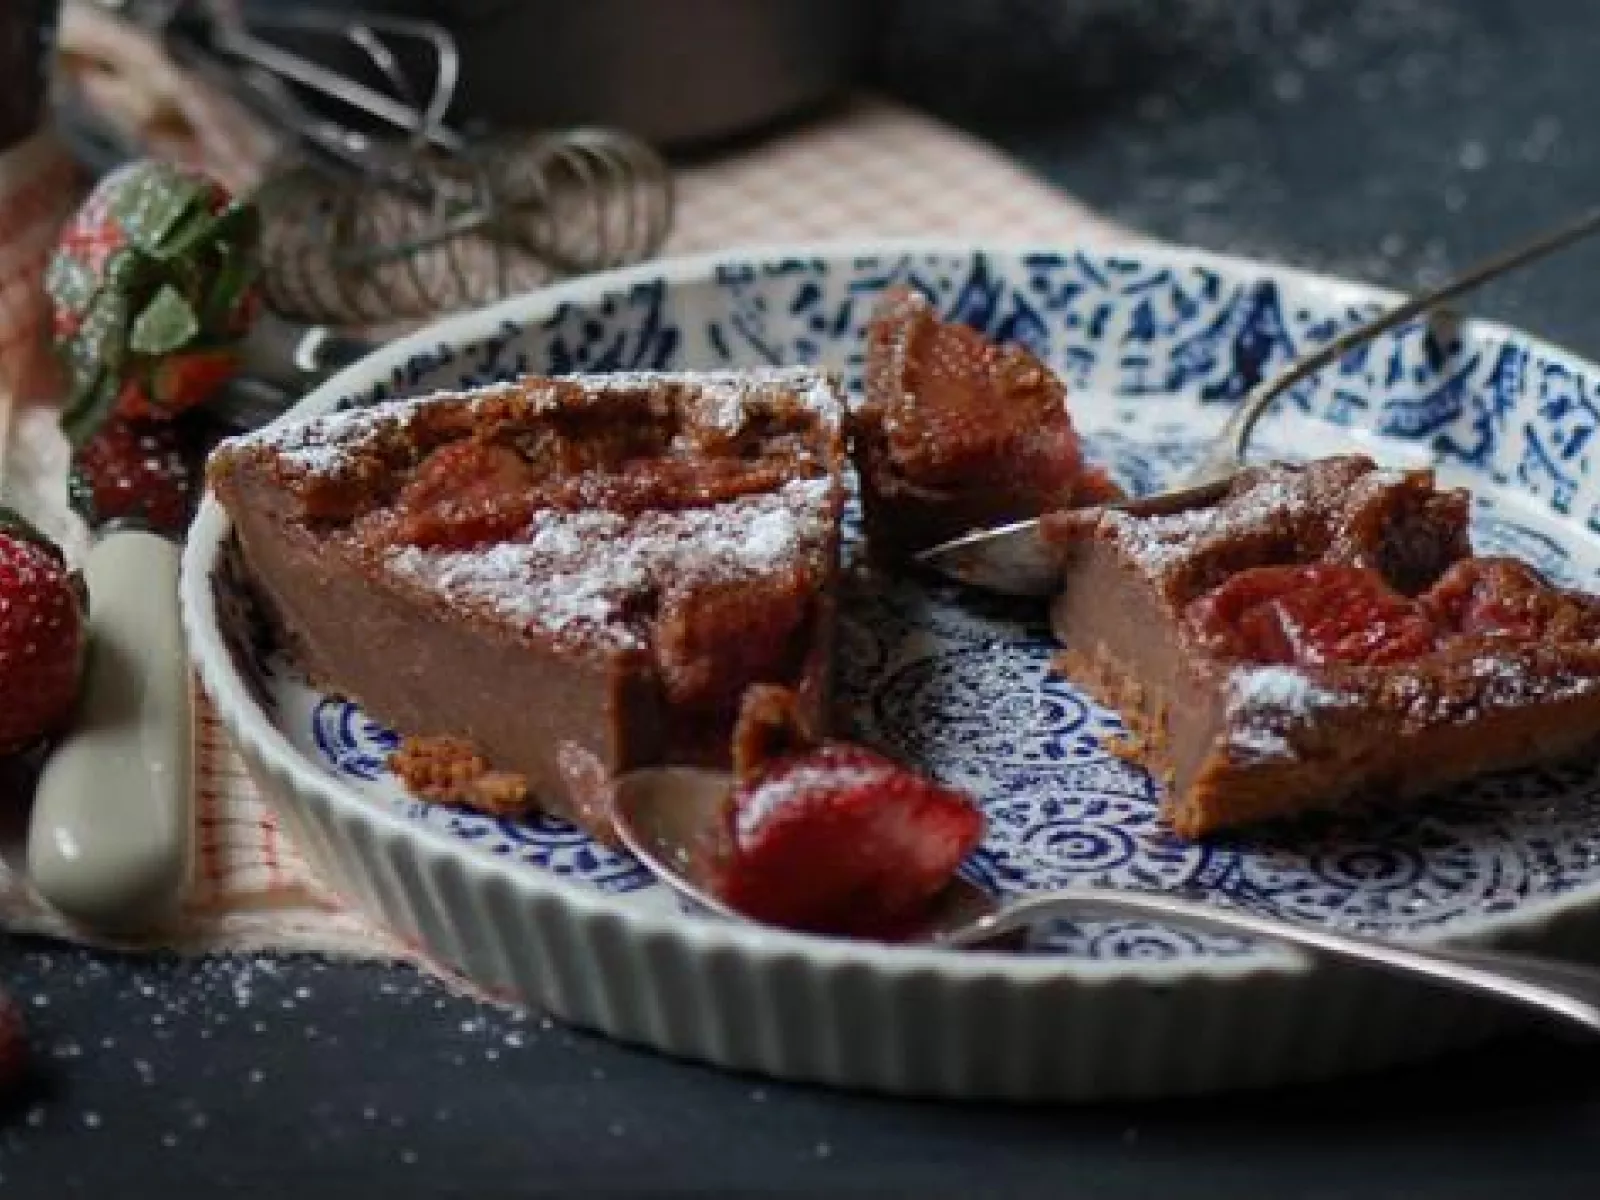 Strawberry and Chocolate Clafoutis